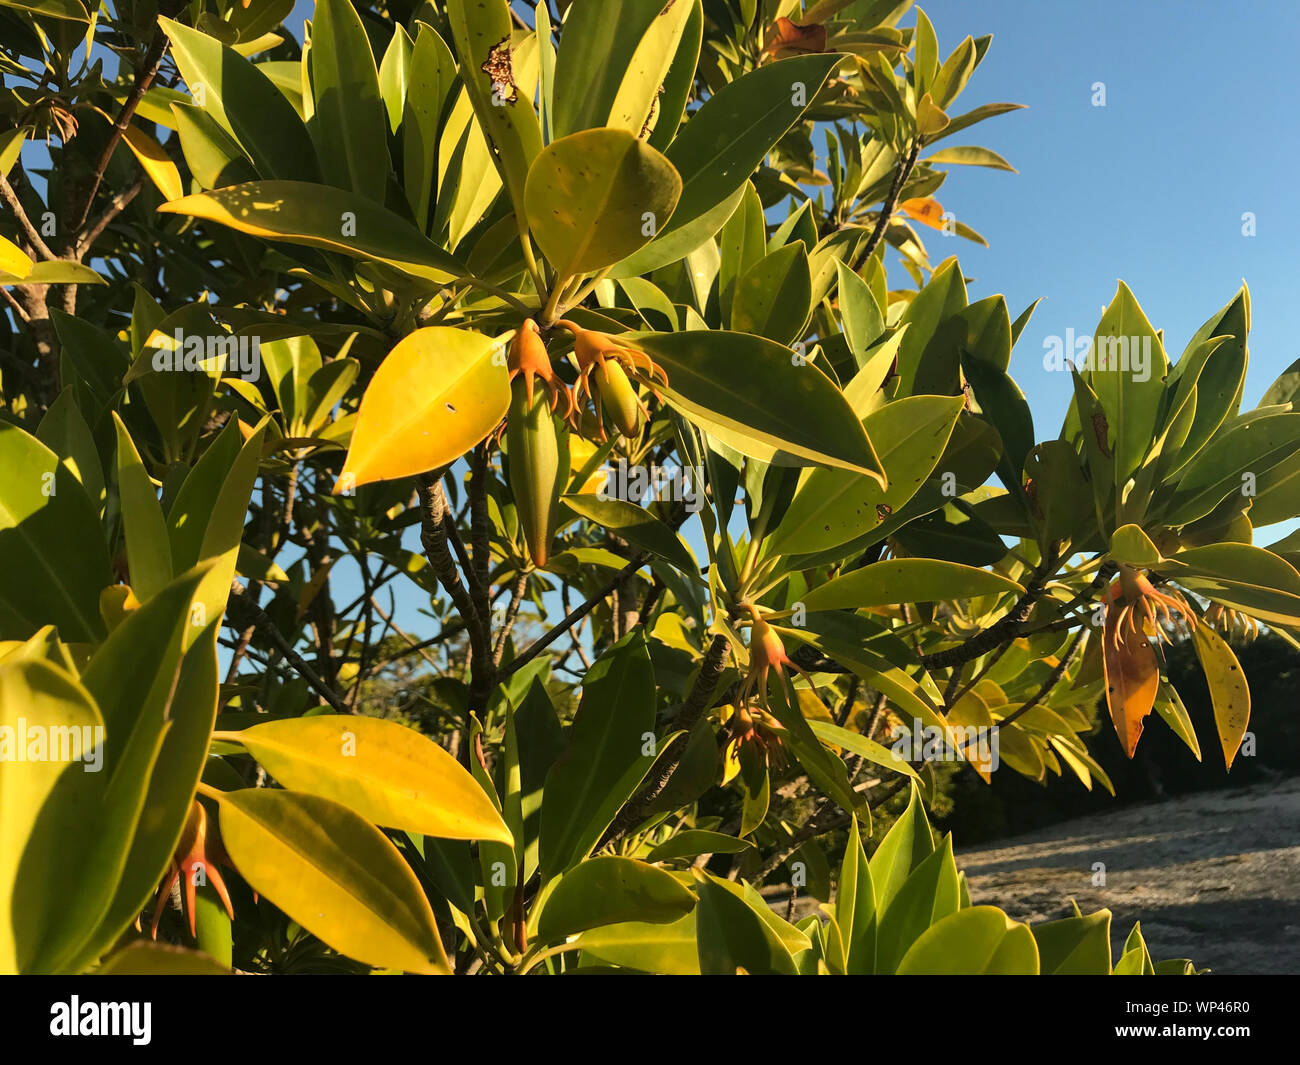 Leaves and fruits, propagules, of the mangrove Bruguiera gymnorhiza in a south waest coastal forest in Madagascar Stock Photo